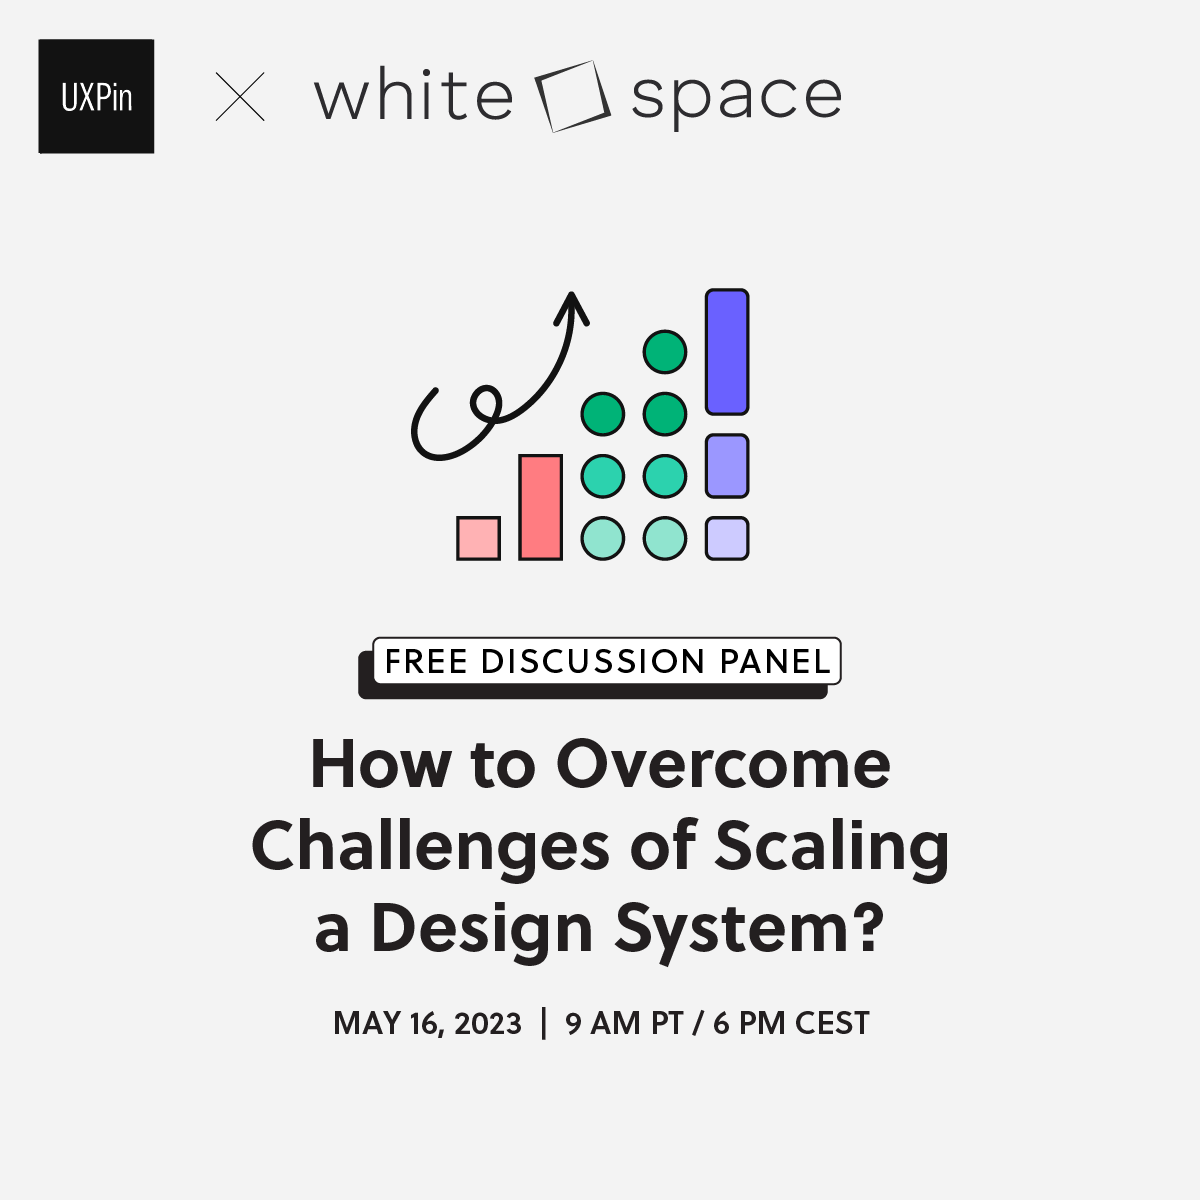 Webinar on Scaling Design Systems